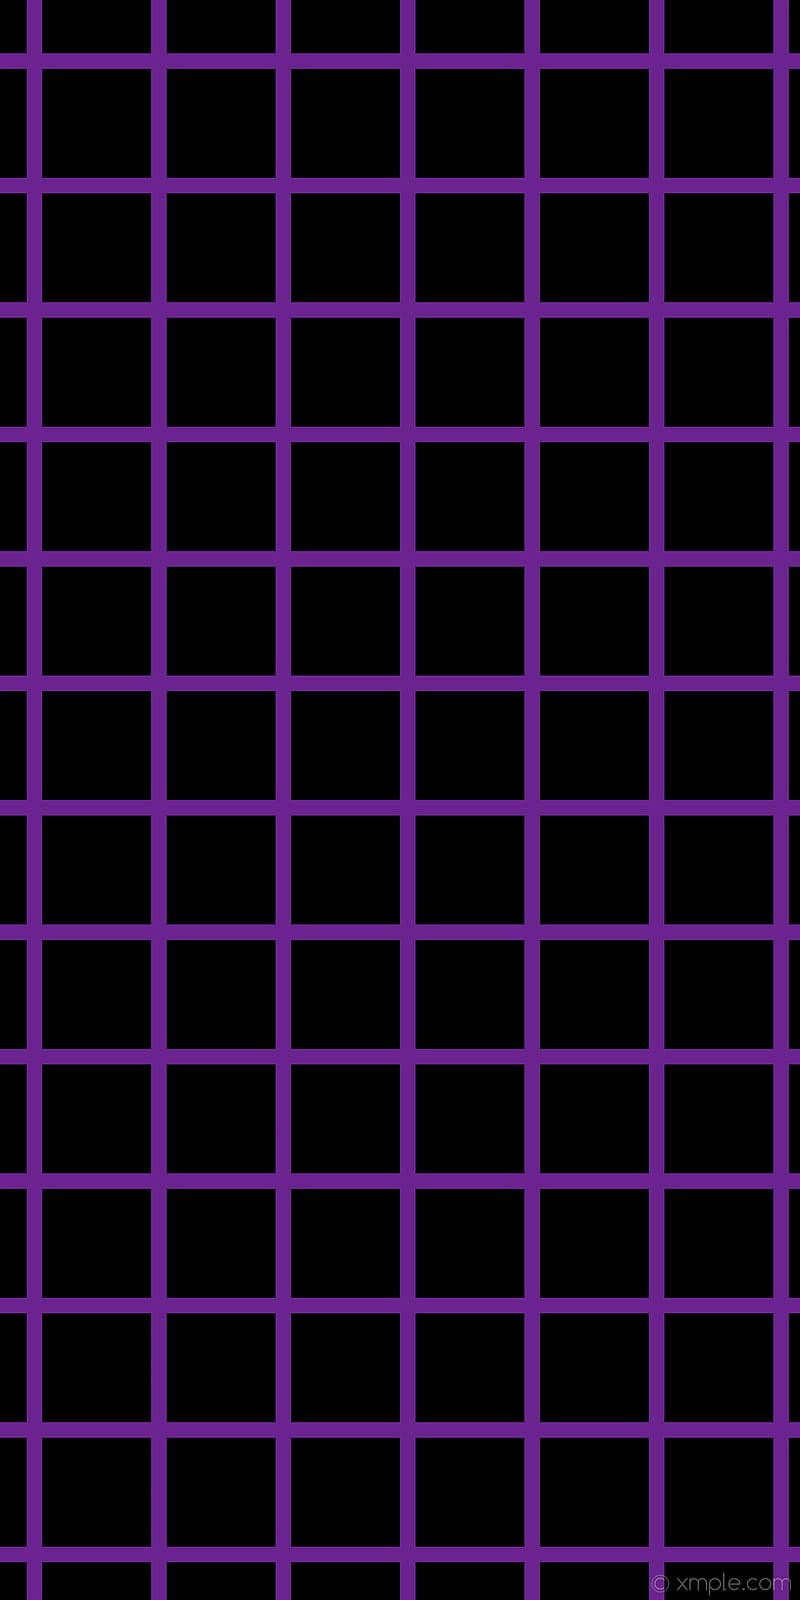 Thick Pink Lines With Black Grid Aesthetic Background